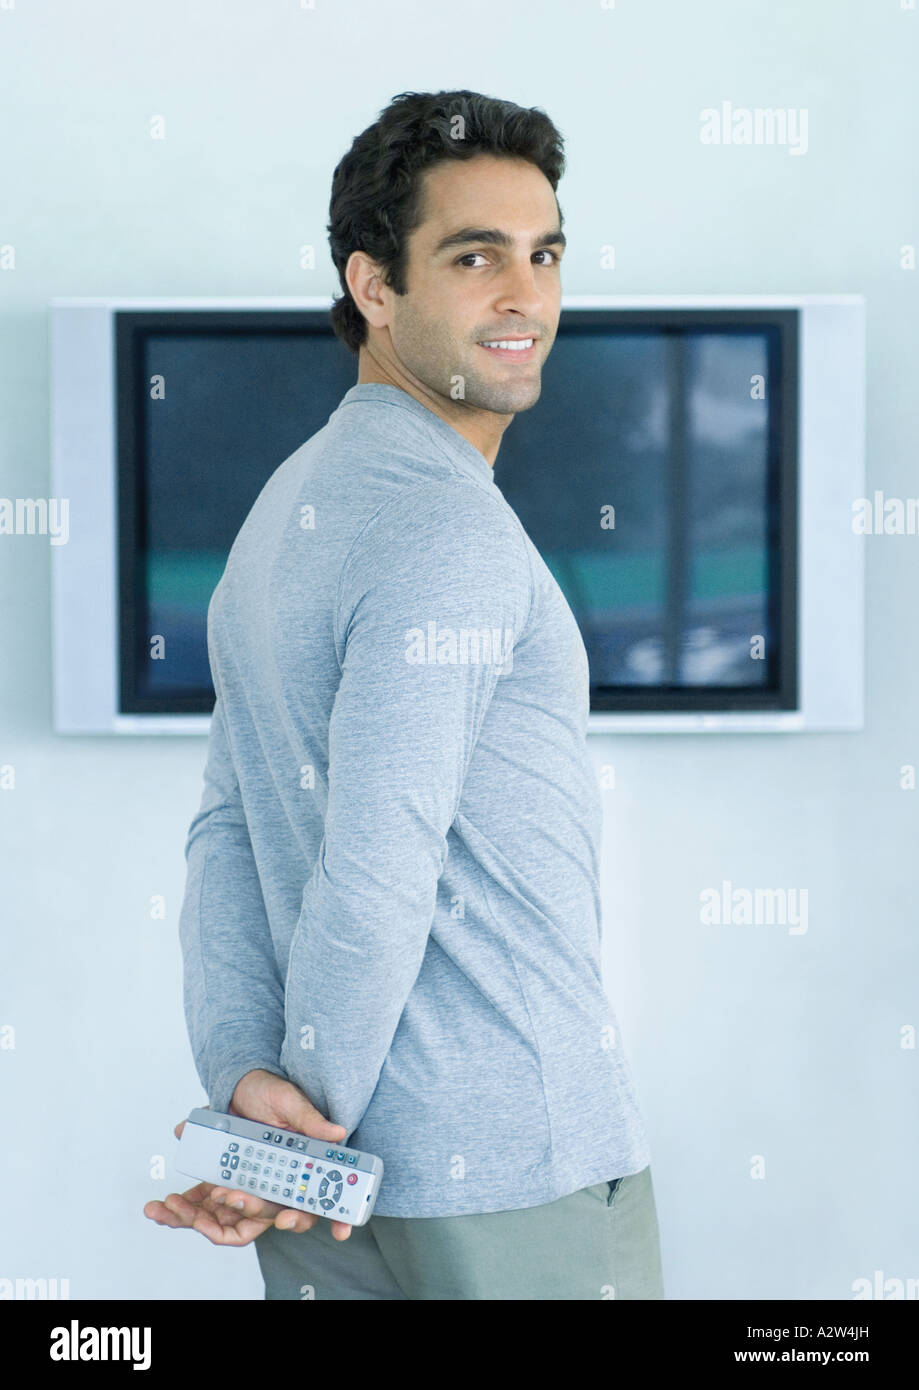 Man standing in front of widescreen TV, holding two remote controls, smiling over shoulder at camera Stock Photo